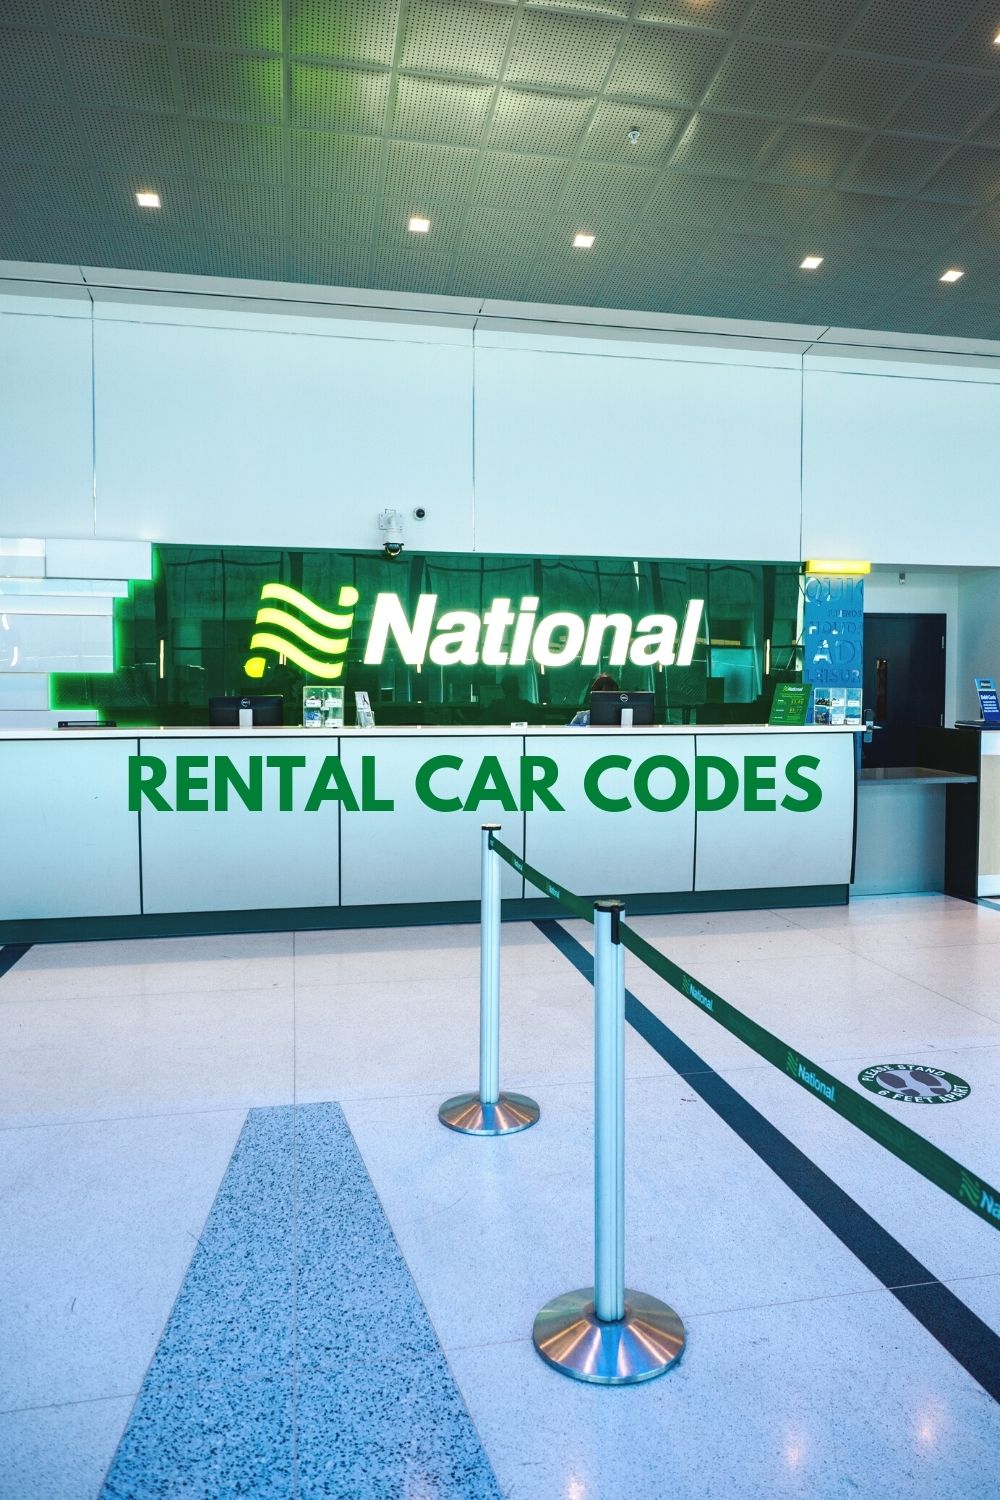 Top National Rental Car Discount Codes in 2022